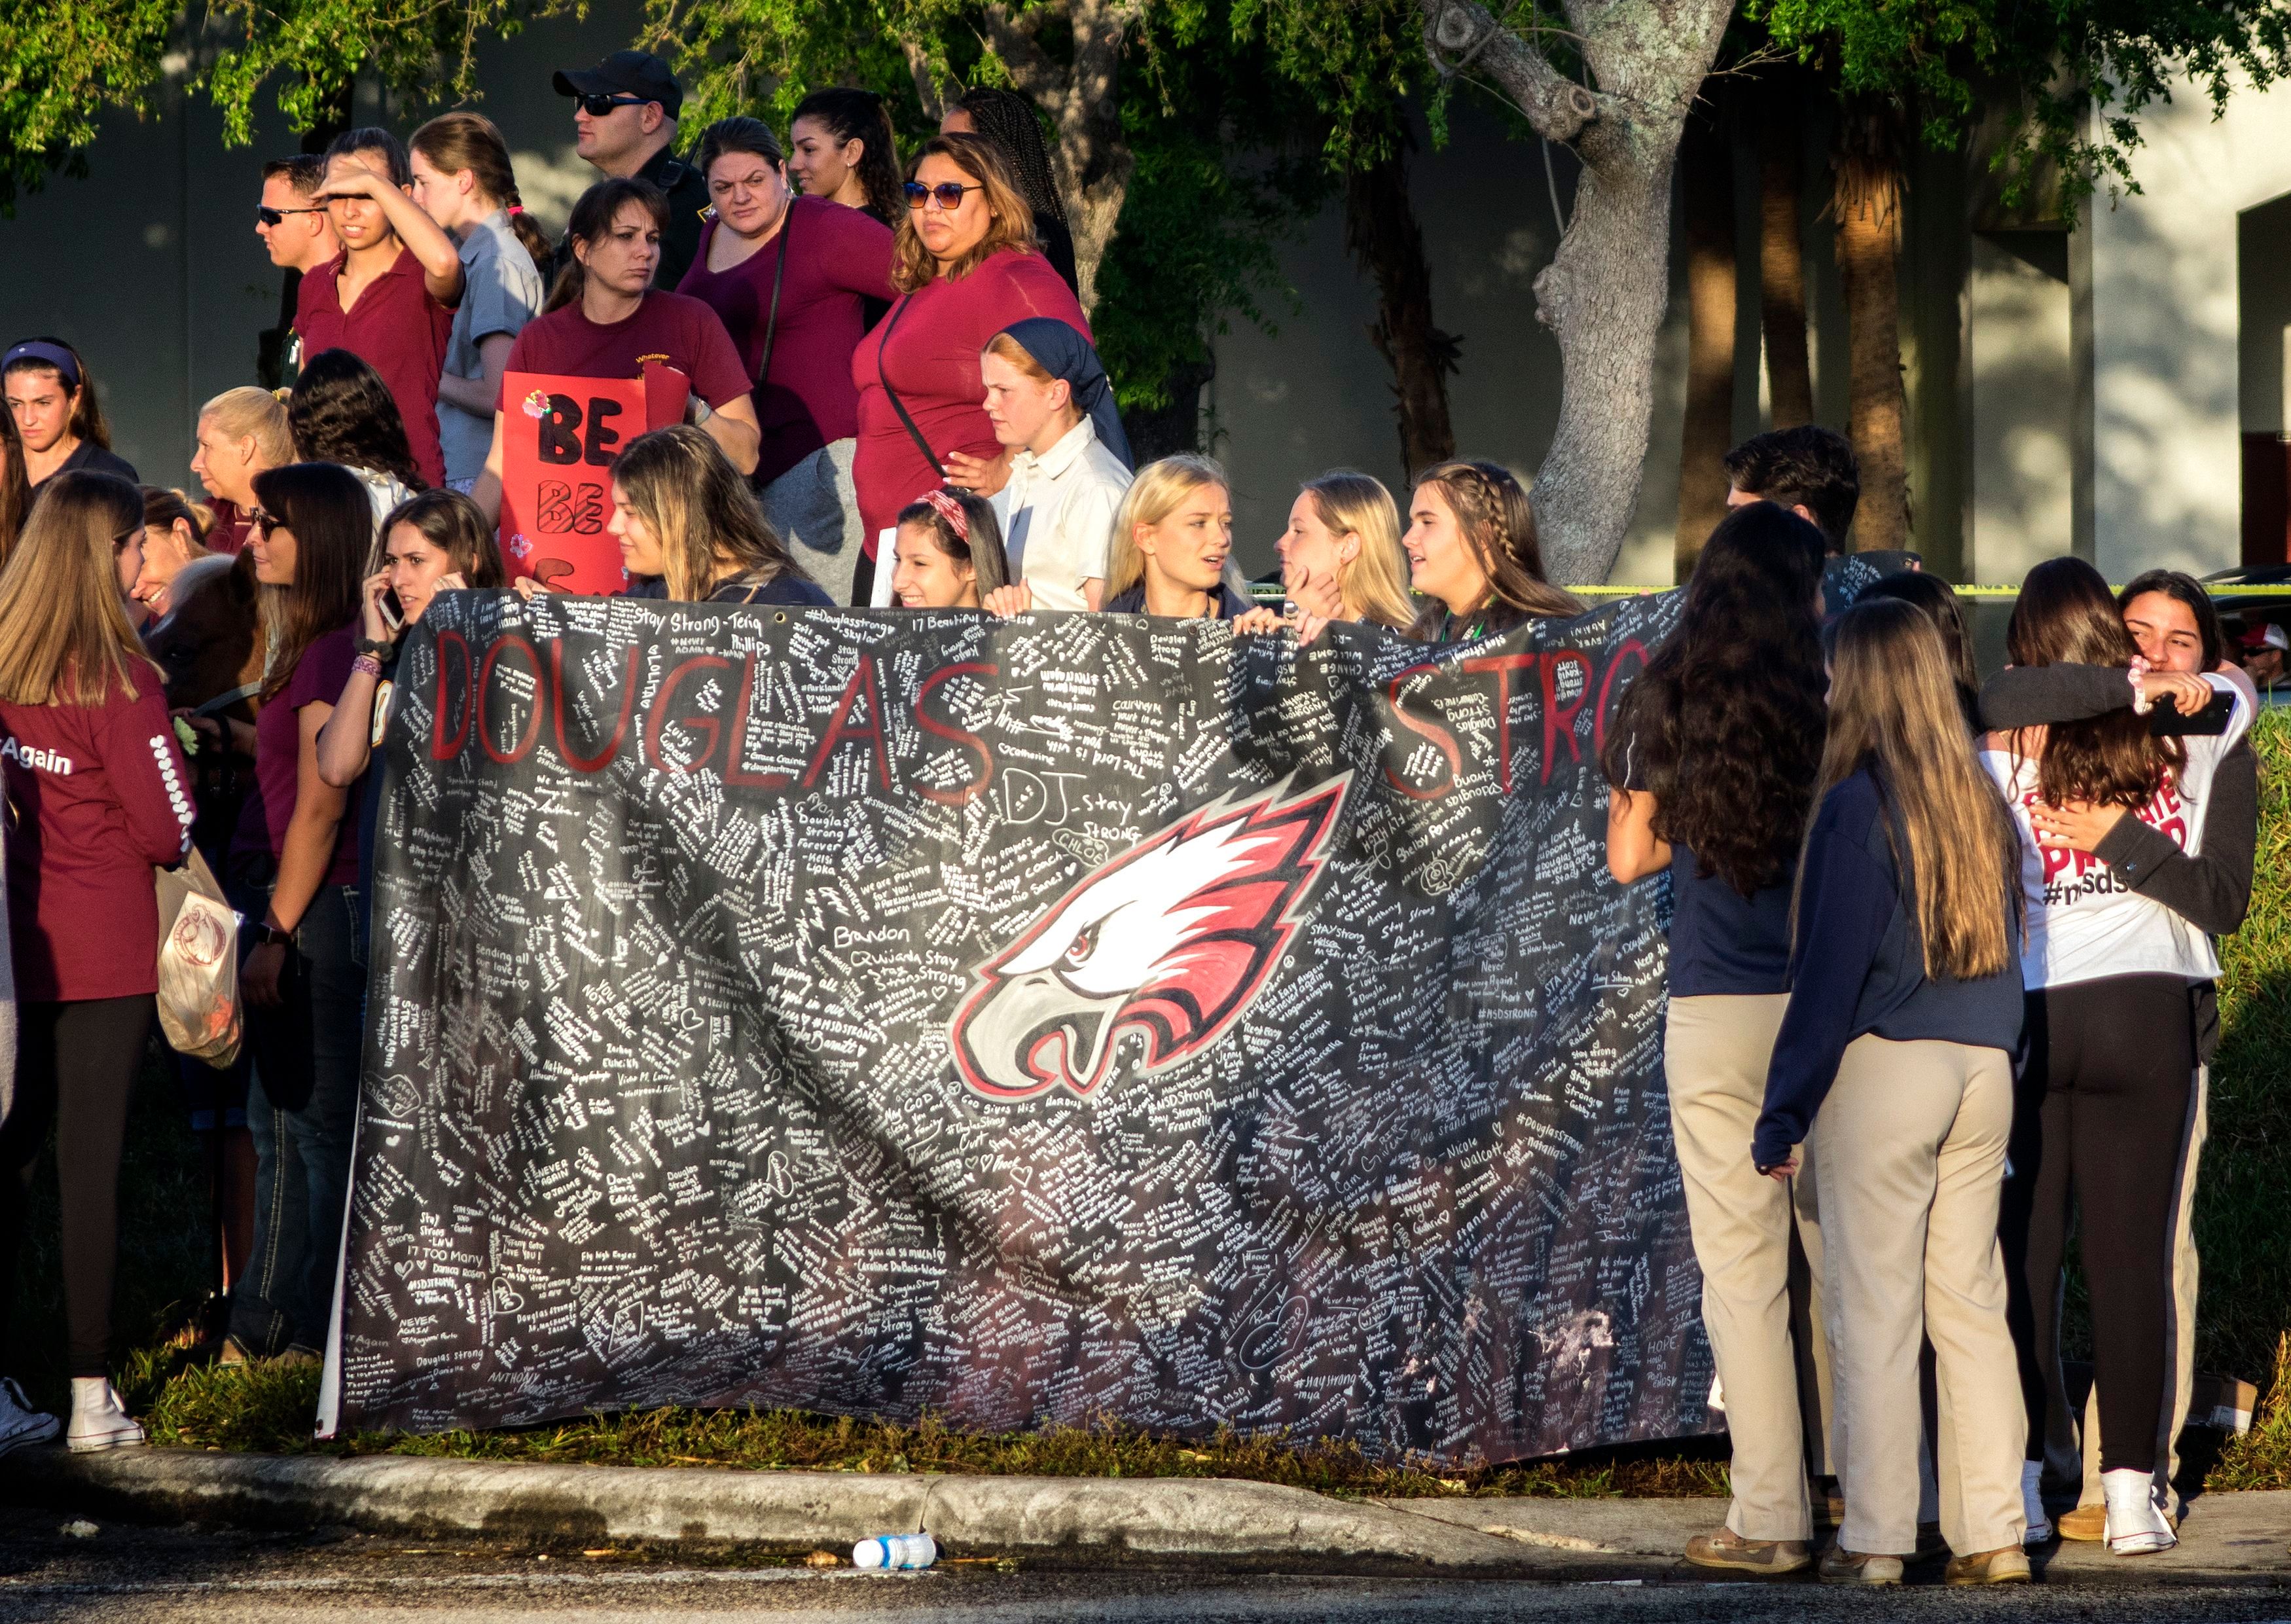 A banner bearing messages is held as parents and students arrive at Marjory Stoneman Douglas High School in Parkland, Florida, USA, 28 February 2018, for the school's reopening, two weeks after the mass shootings at the school. (Cristobal Herrera—EPA-EFE/REX/Shutterstock)